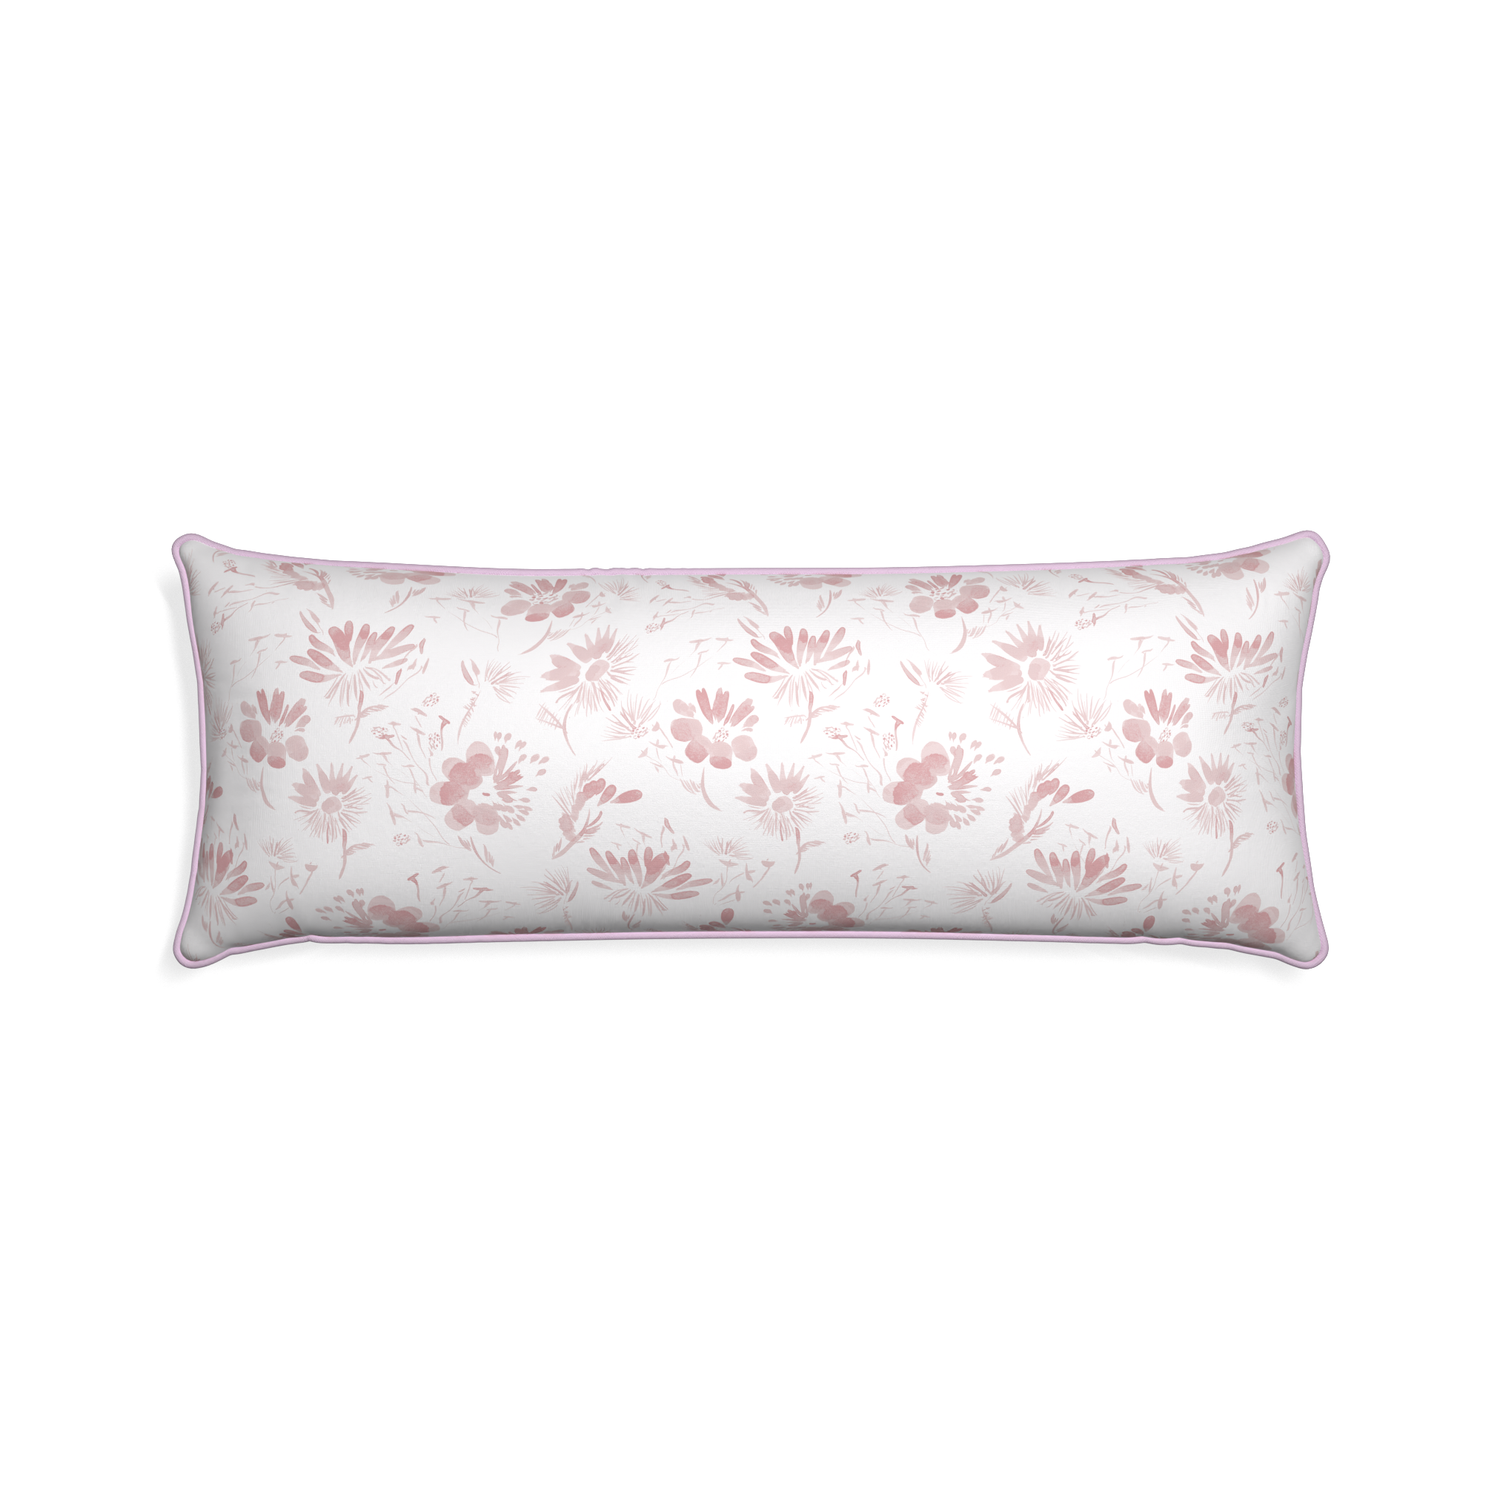 Xl-lumbar blake custom pillow with l piping on white background